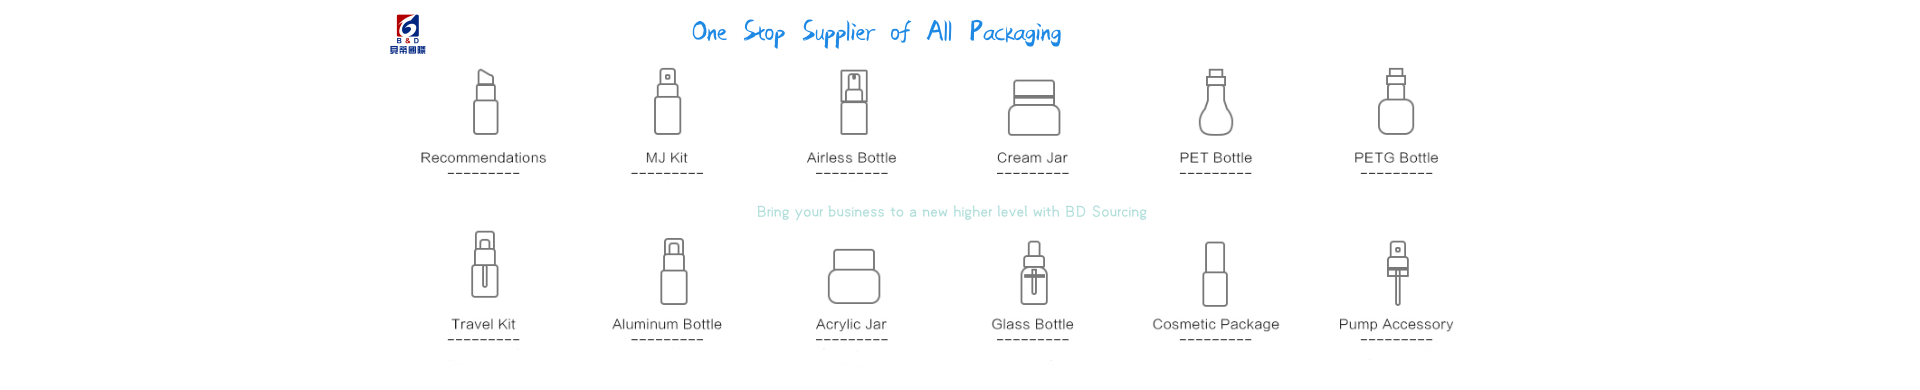 One Stop Supplier Of All Things Packaging